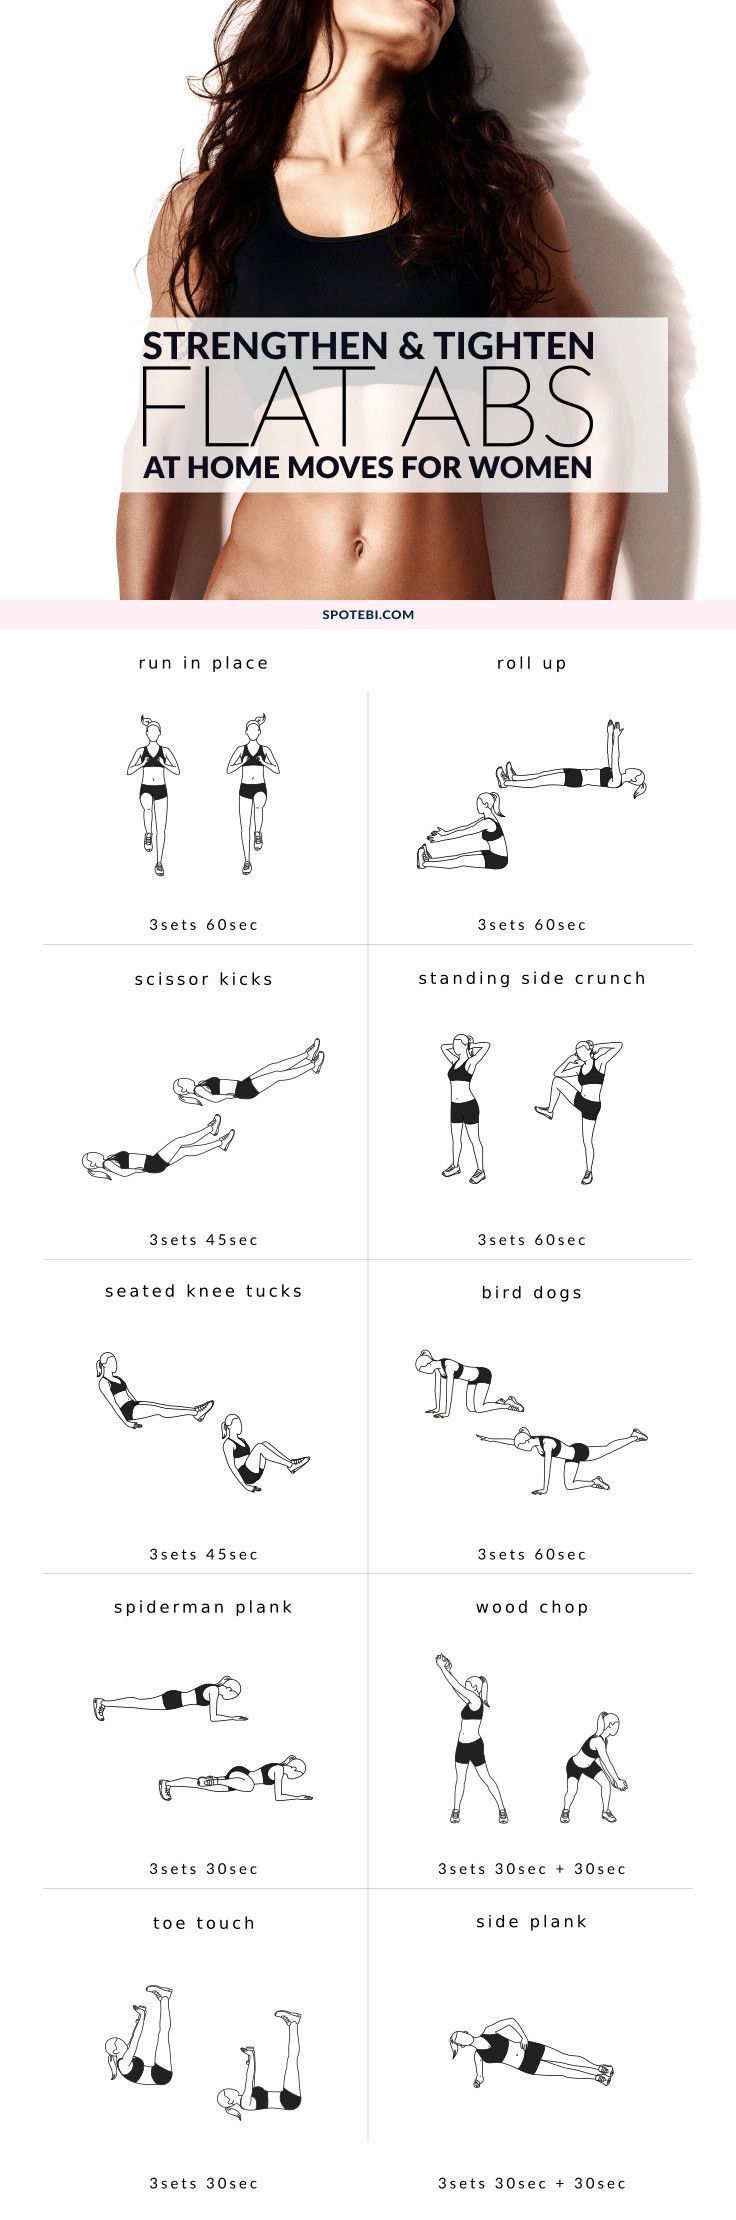 Flatten your belly, burn fat and strengthen your core with these killer tummy toning exercises. This flat abs workout routine for